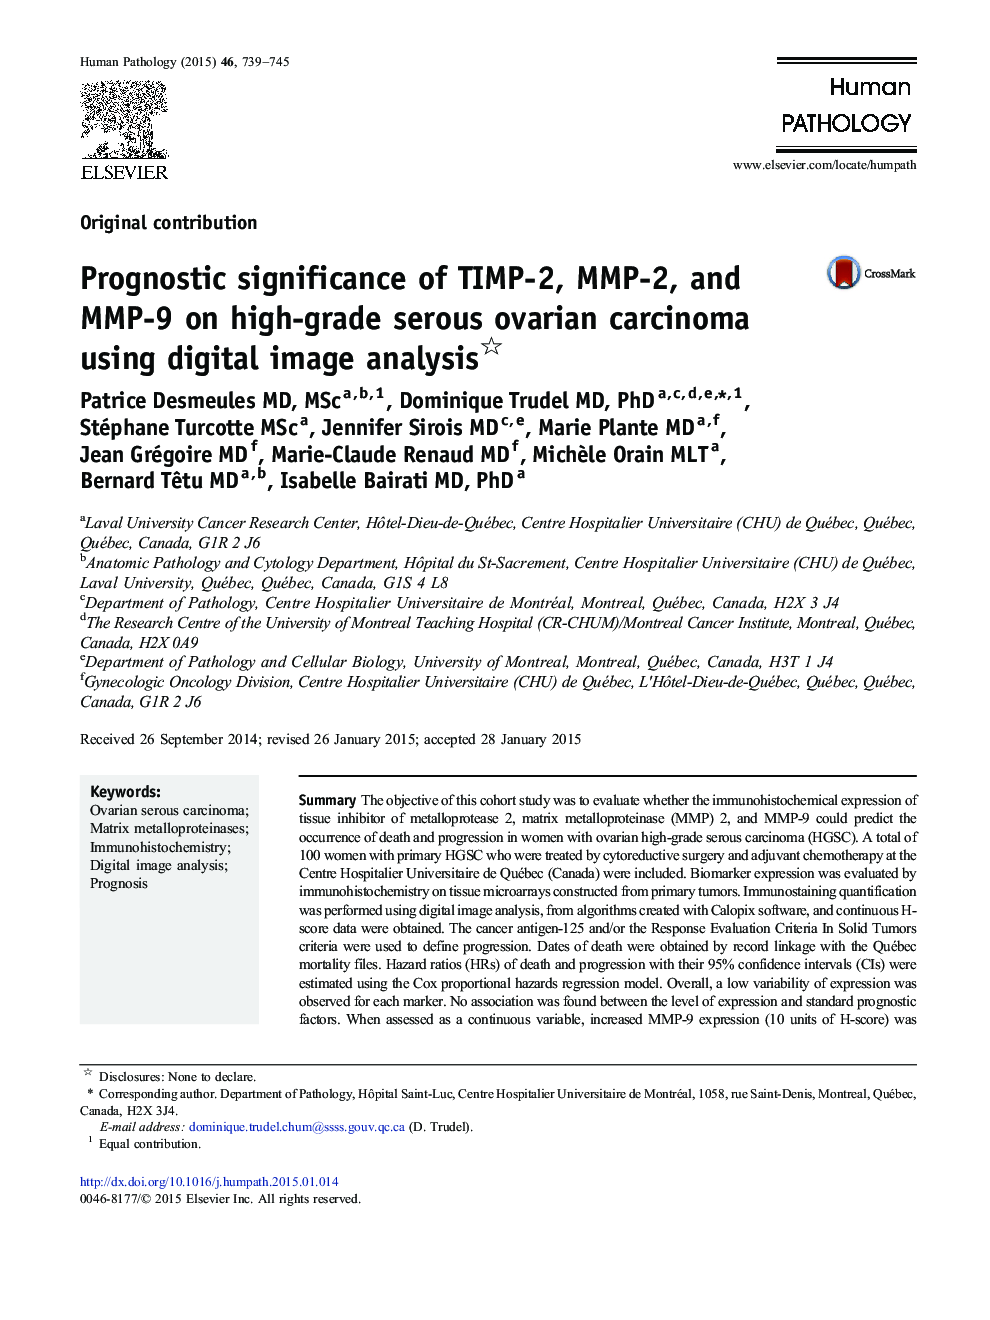 Prognostic significance of TIMP-2, MMP-2, and MMP-9 on high-grade serous ovarian carcinoma using digital image analysis 